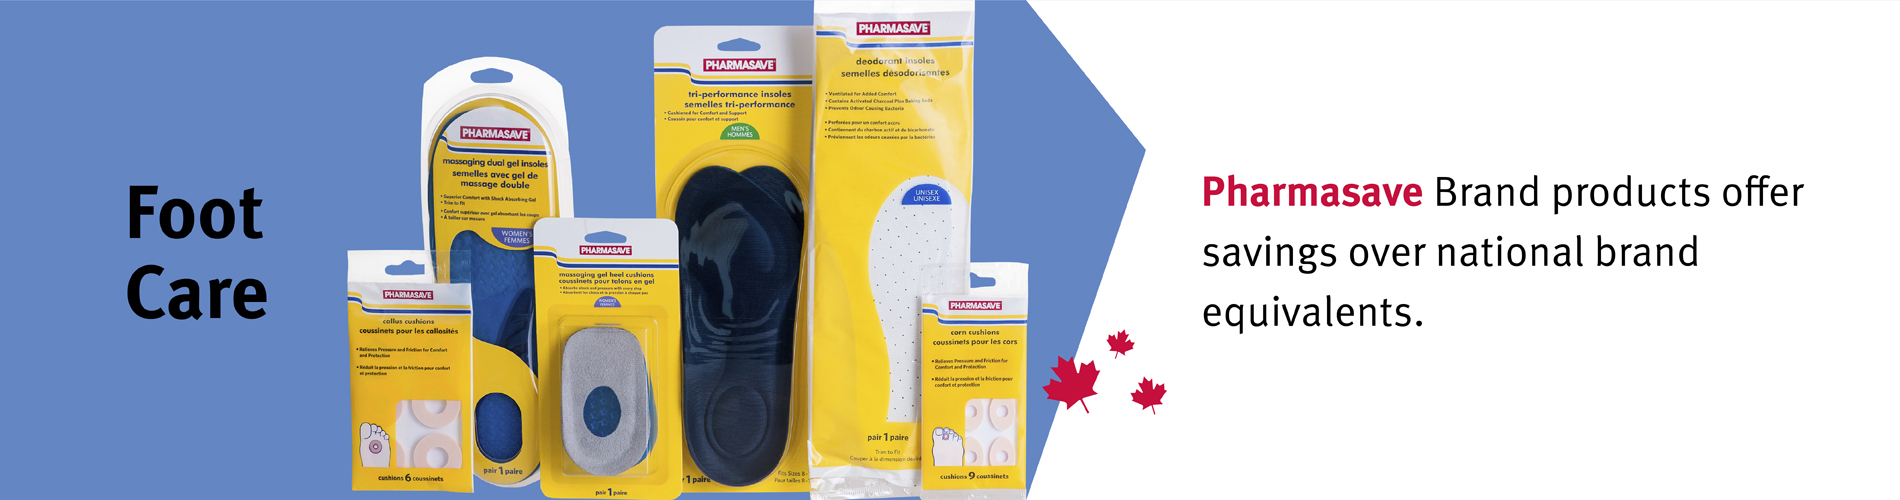 Pharmasave carries foot care products for all foot ailments.